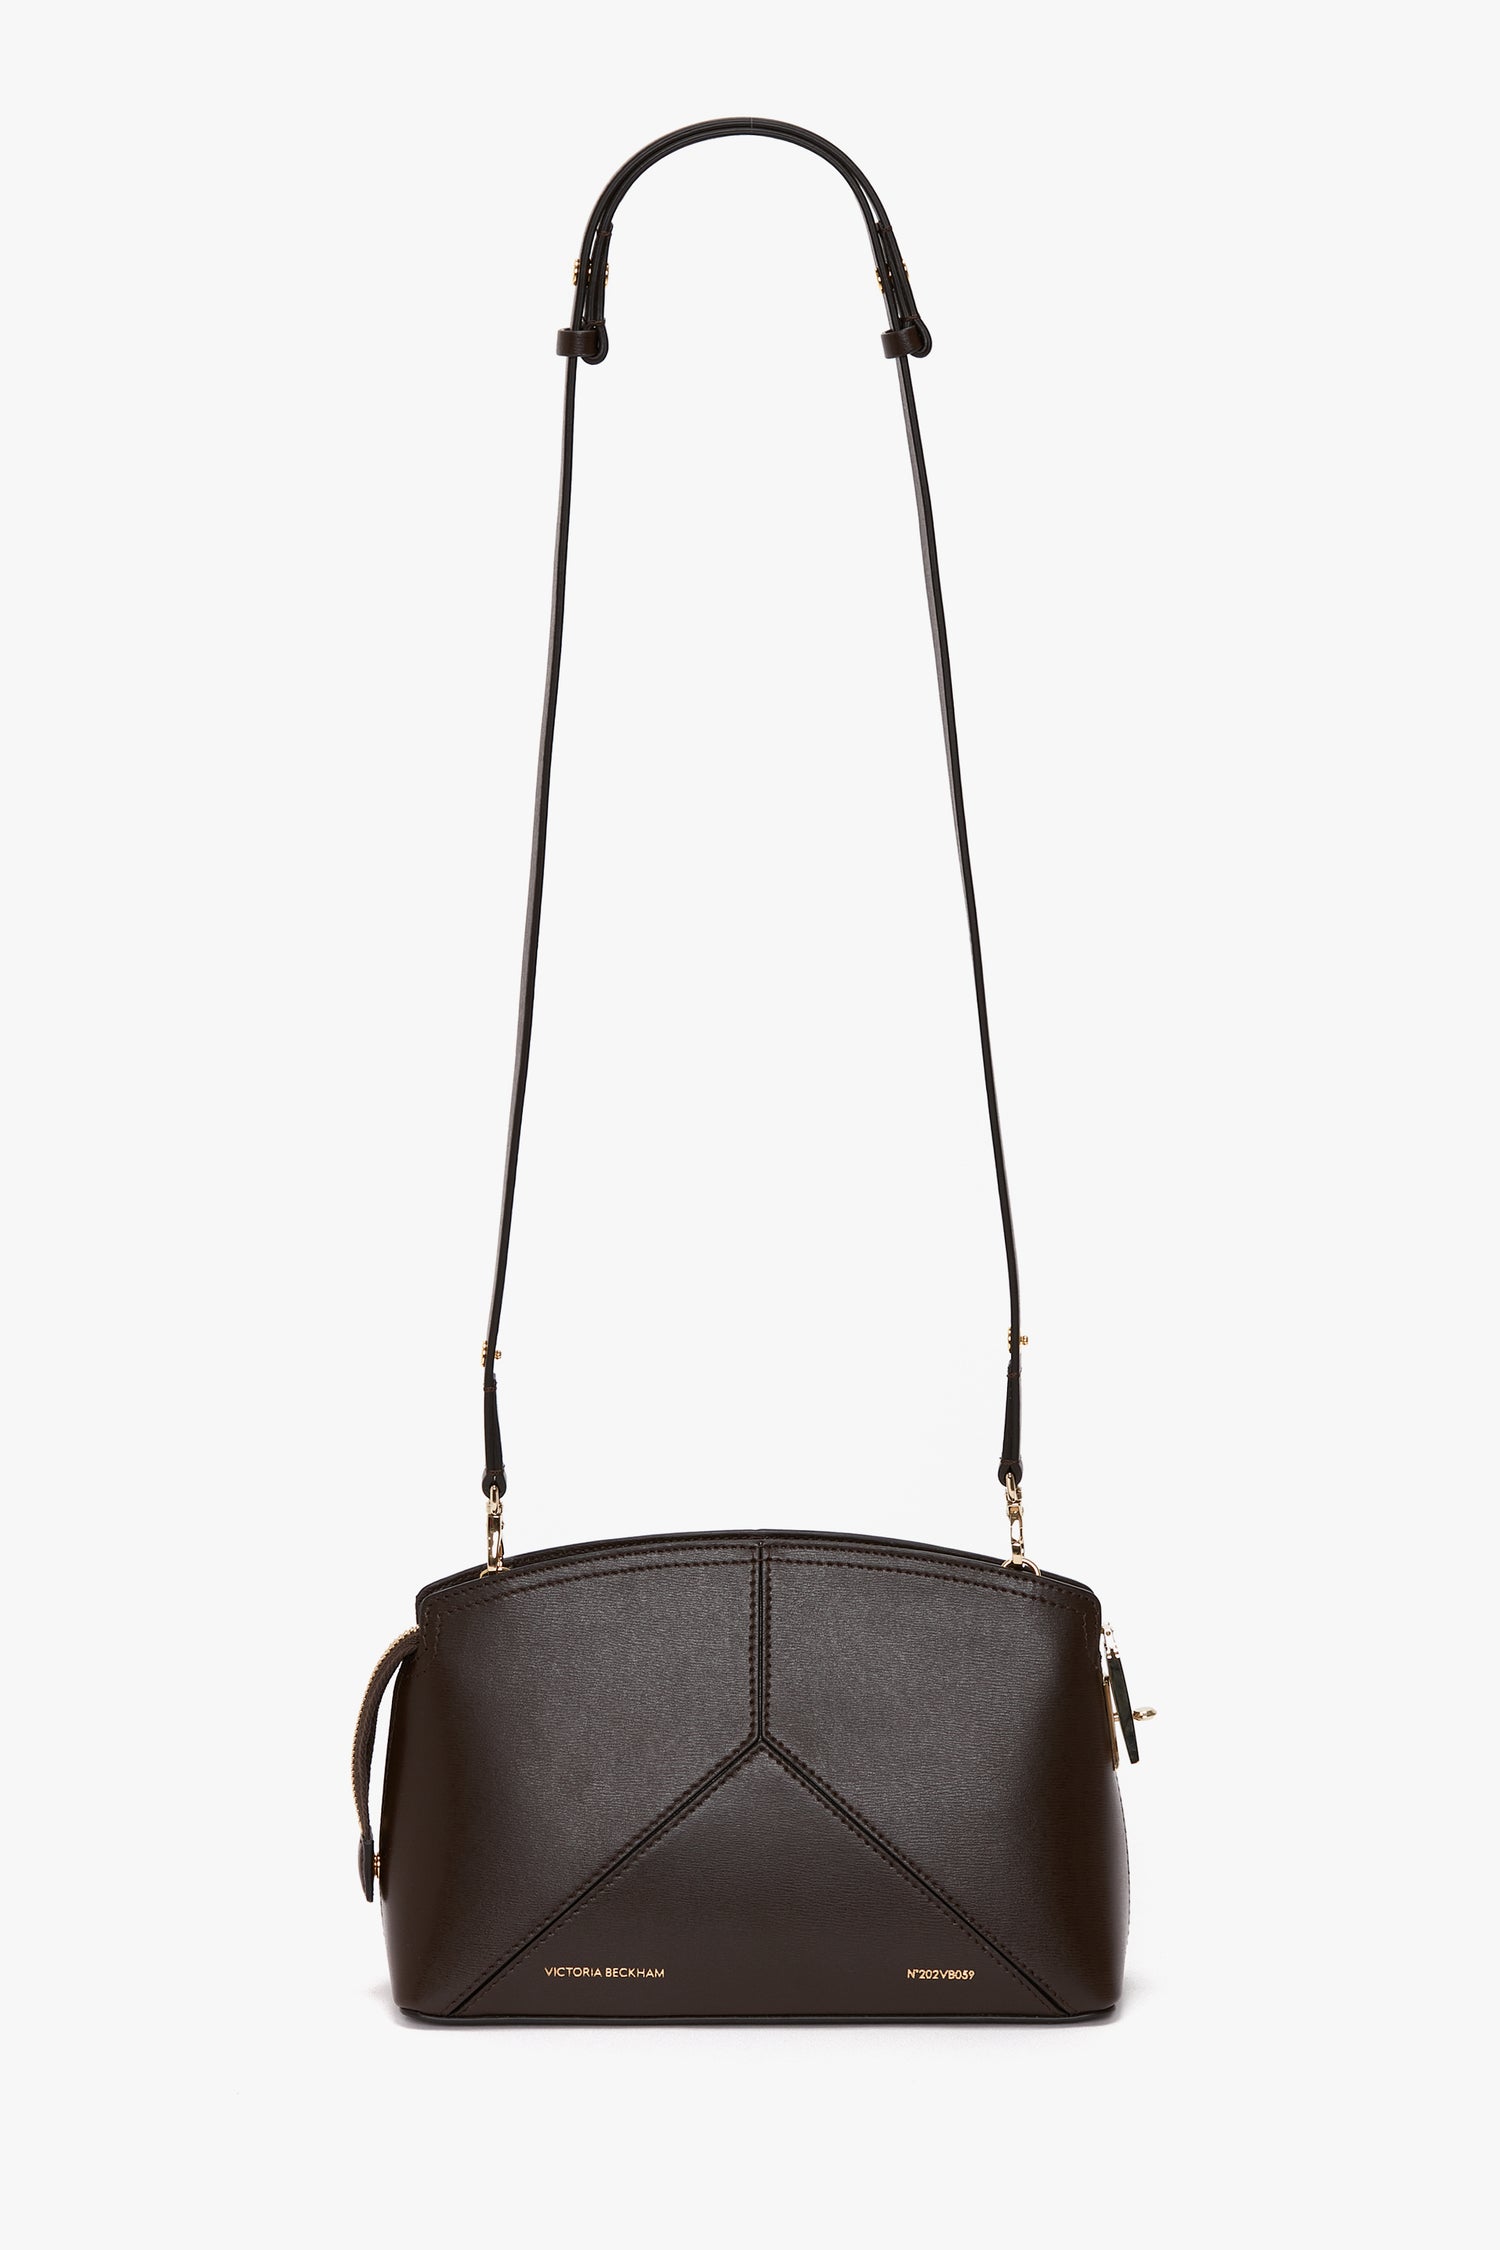 The Exclusive Victoria Crossbody Bag In Brown Leather by Victoria Beckham, crafted from sumptuous calf leather, features gold accents, an adjustable shoulder strap, and intricate geometric stitching detail.